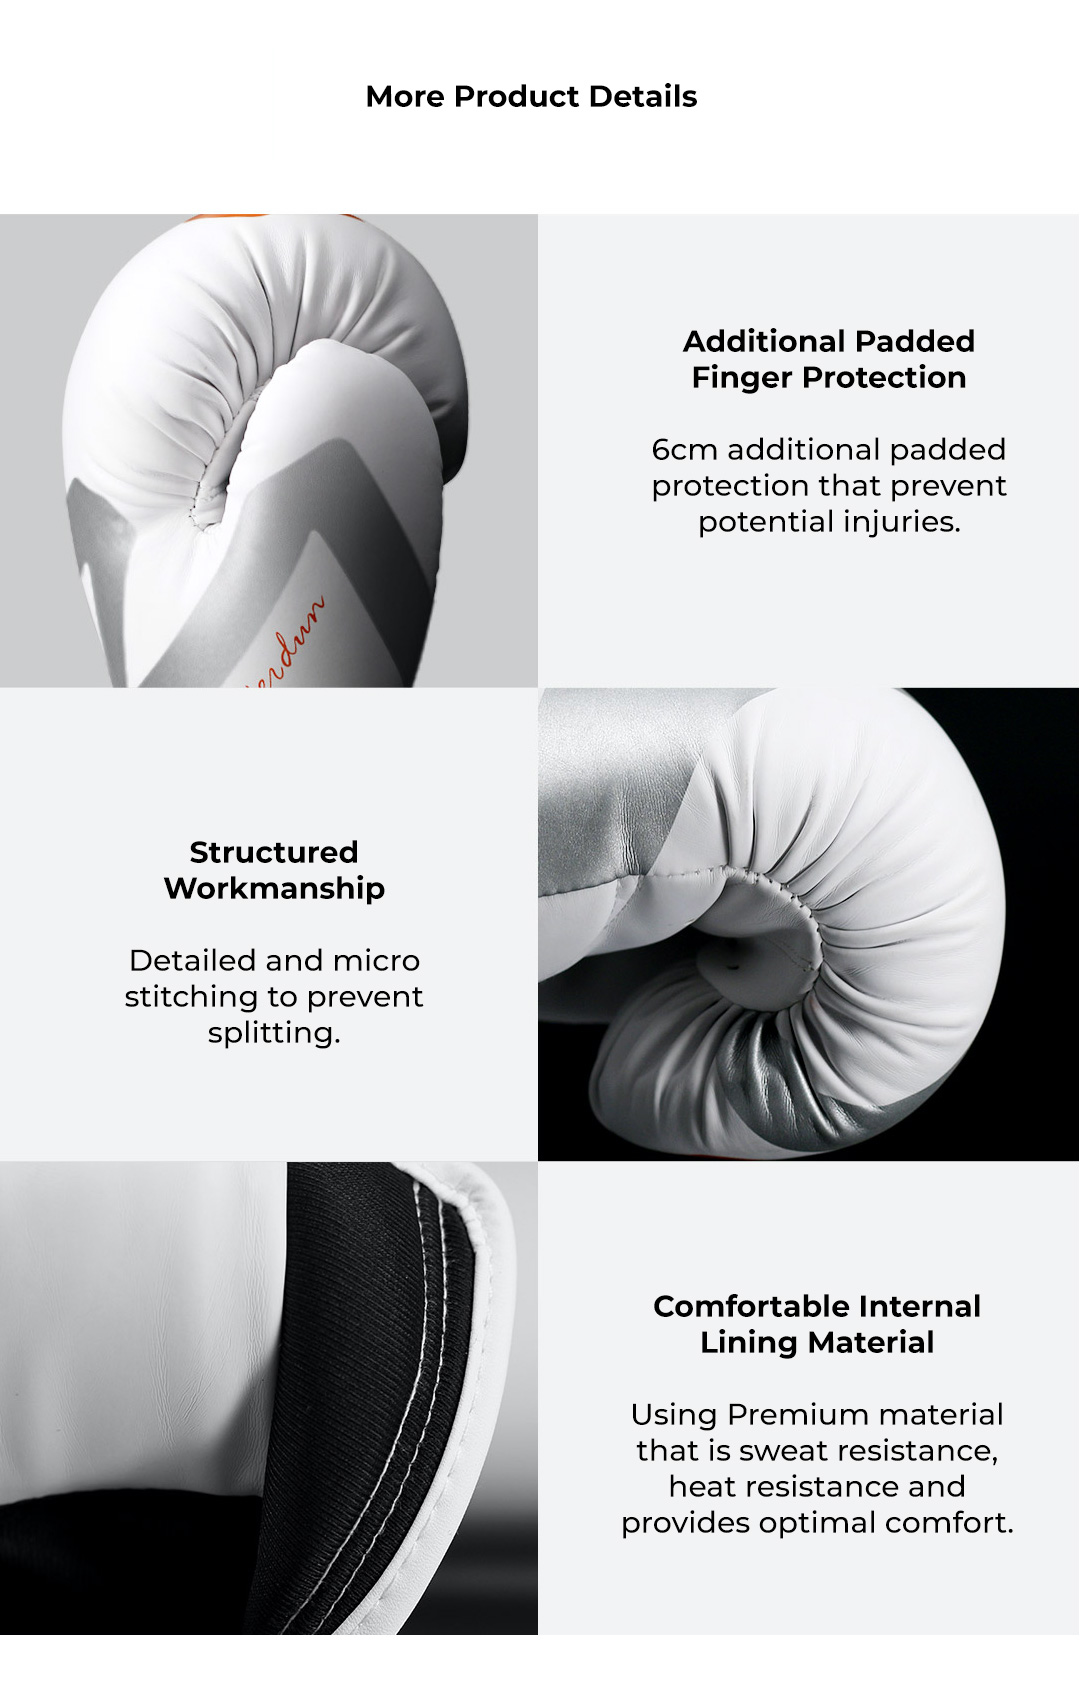 Xiaomi FED Training Boxing Gloves